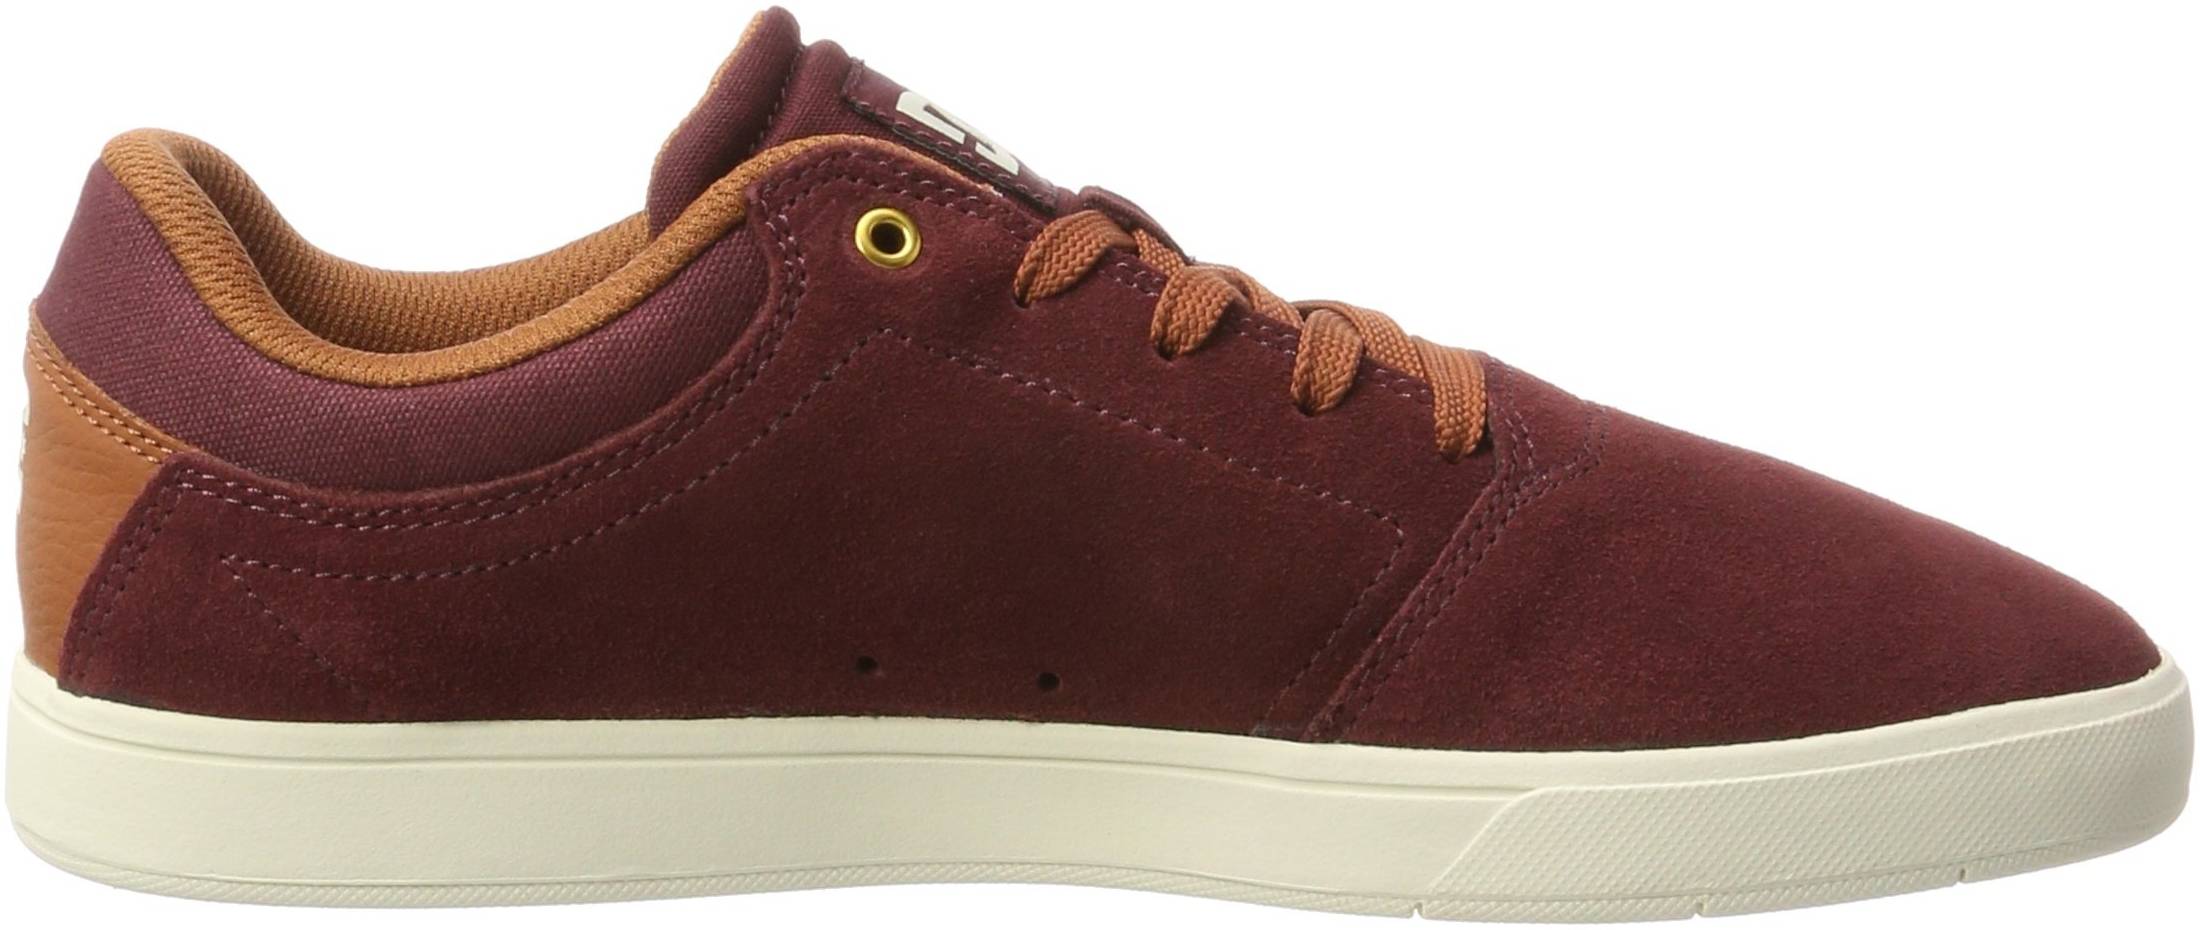 dc shoes maroon